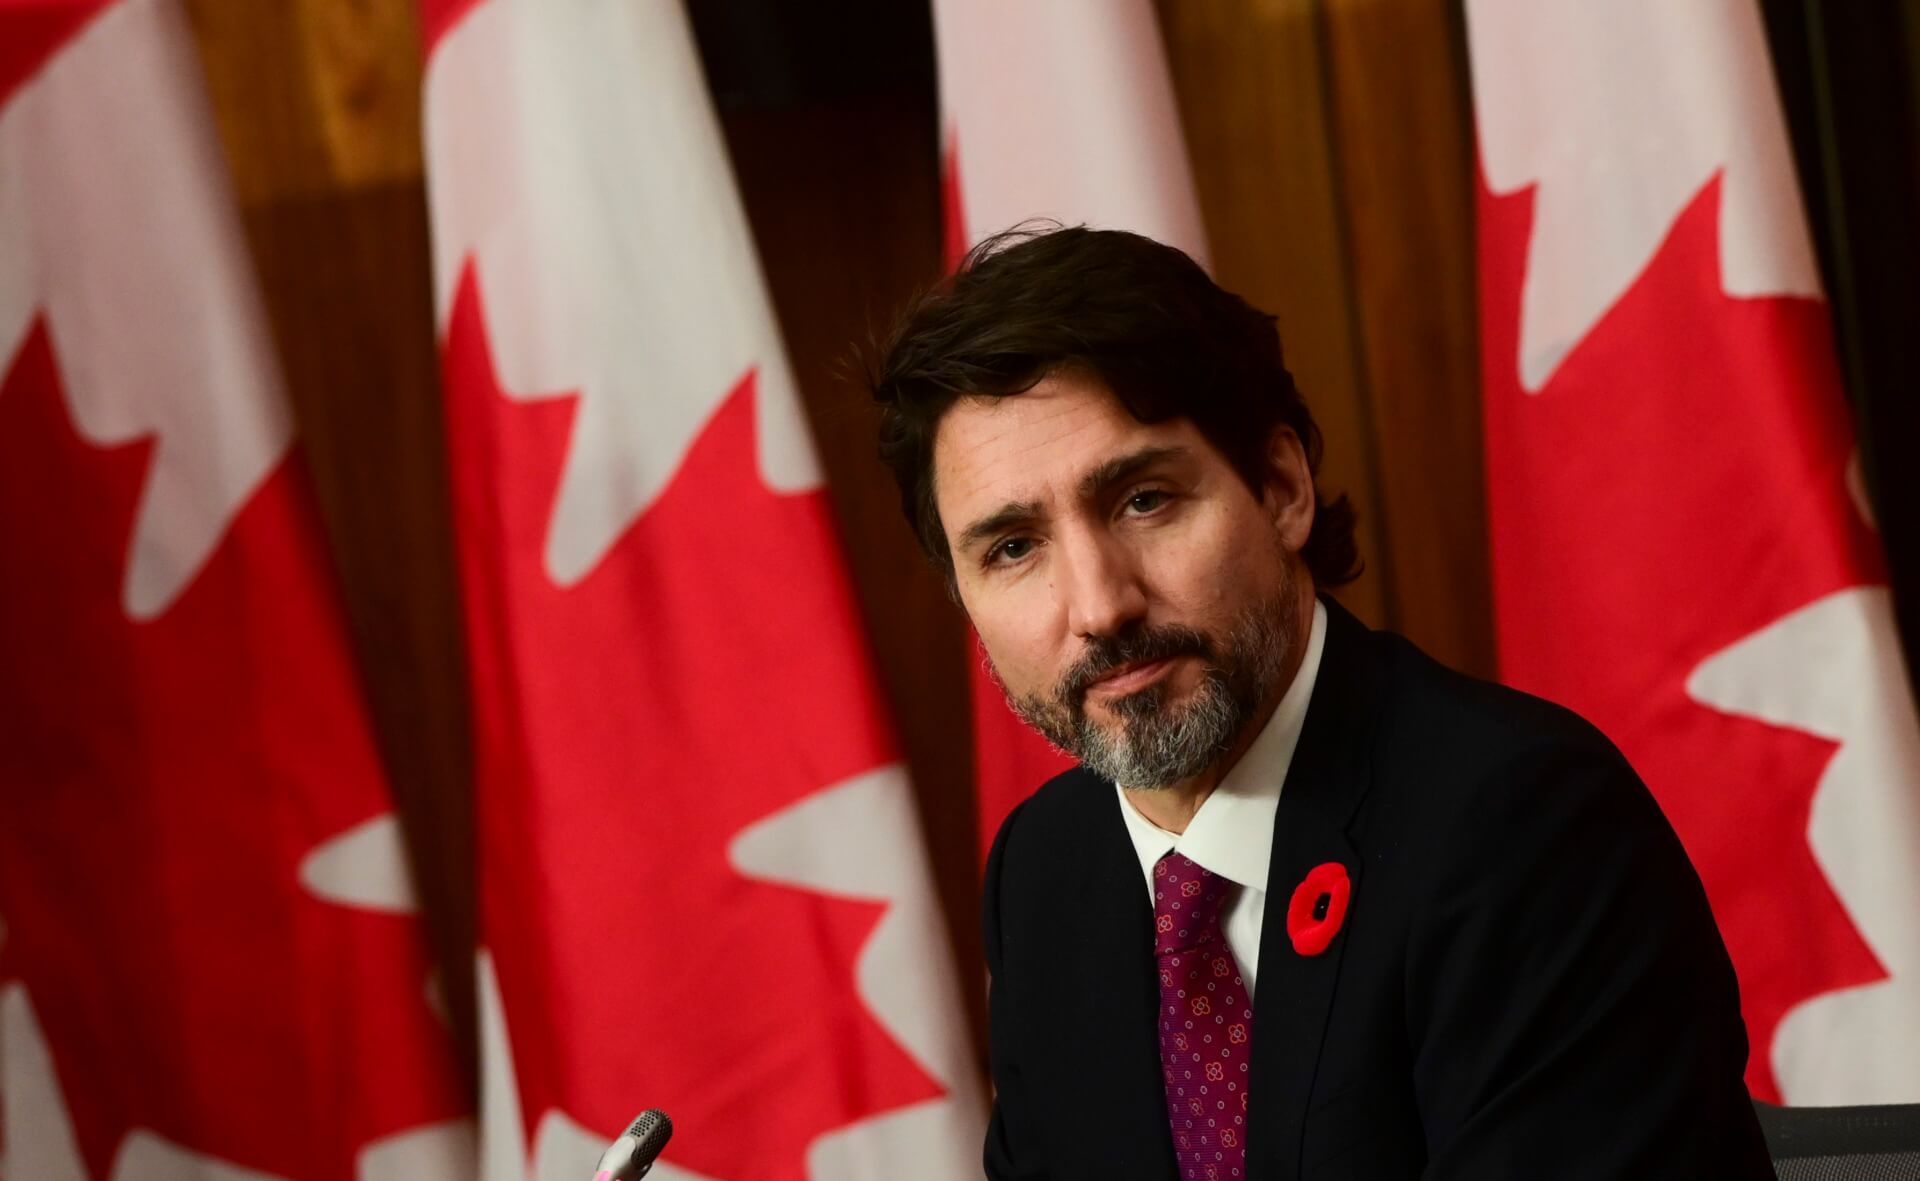 Canada Labels China’s Treatment of Uighurs Genocide, Trudeau’s Cabinet Abstains From Vote